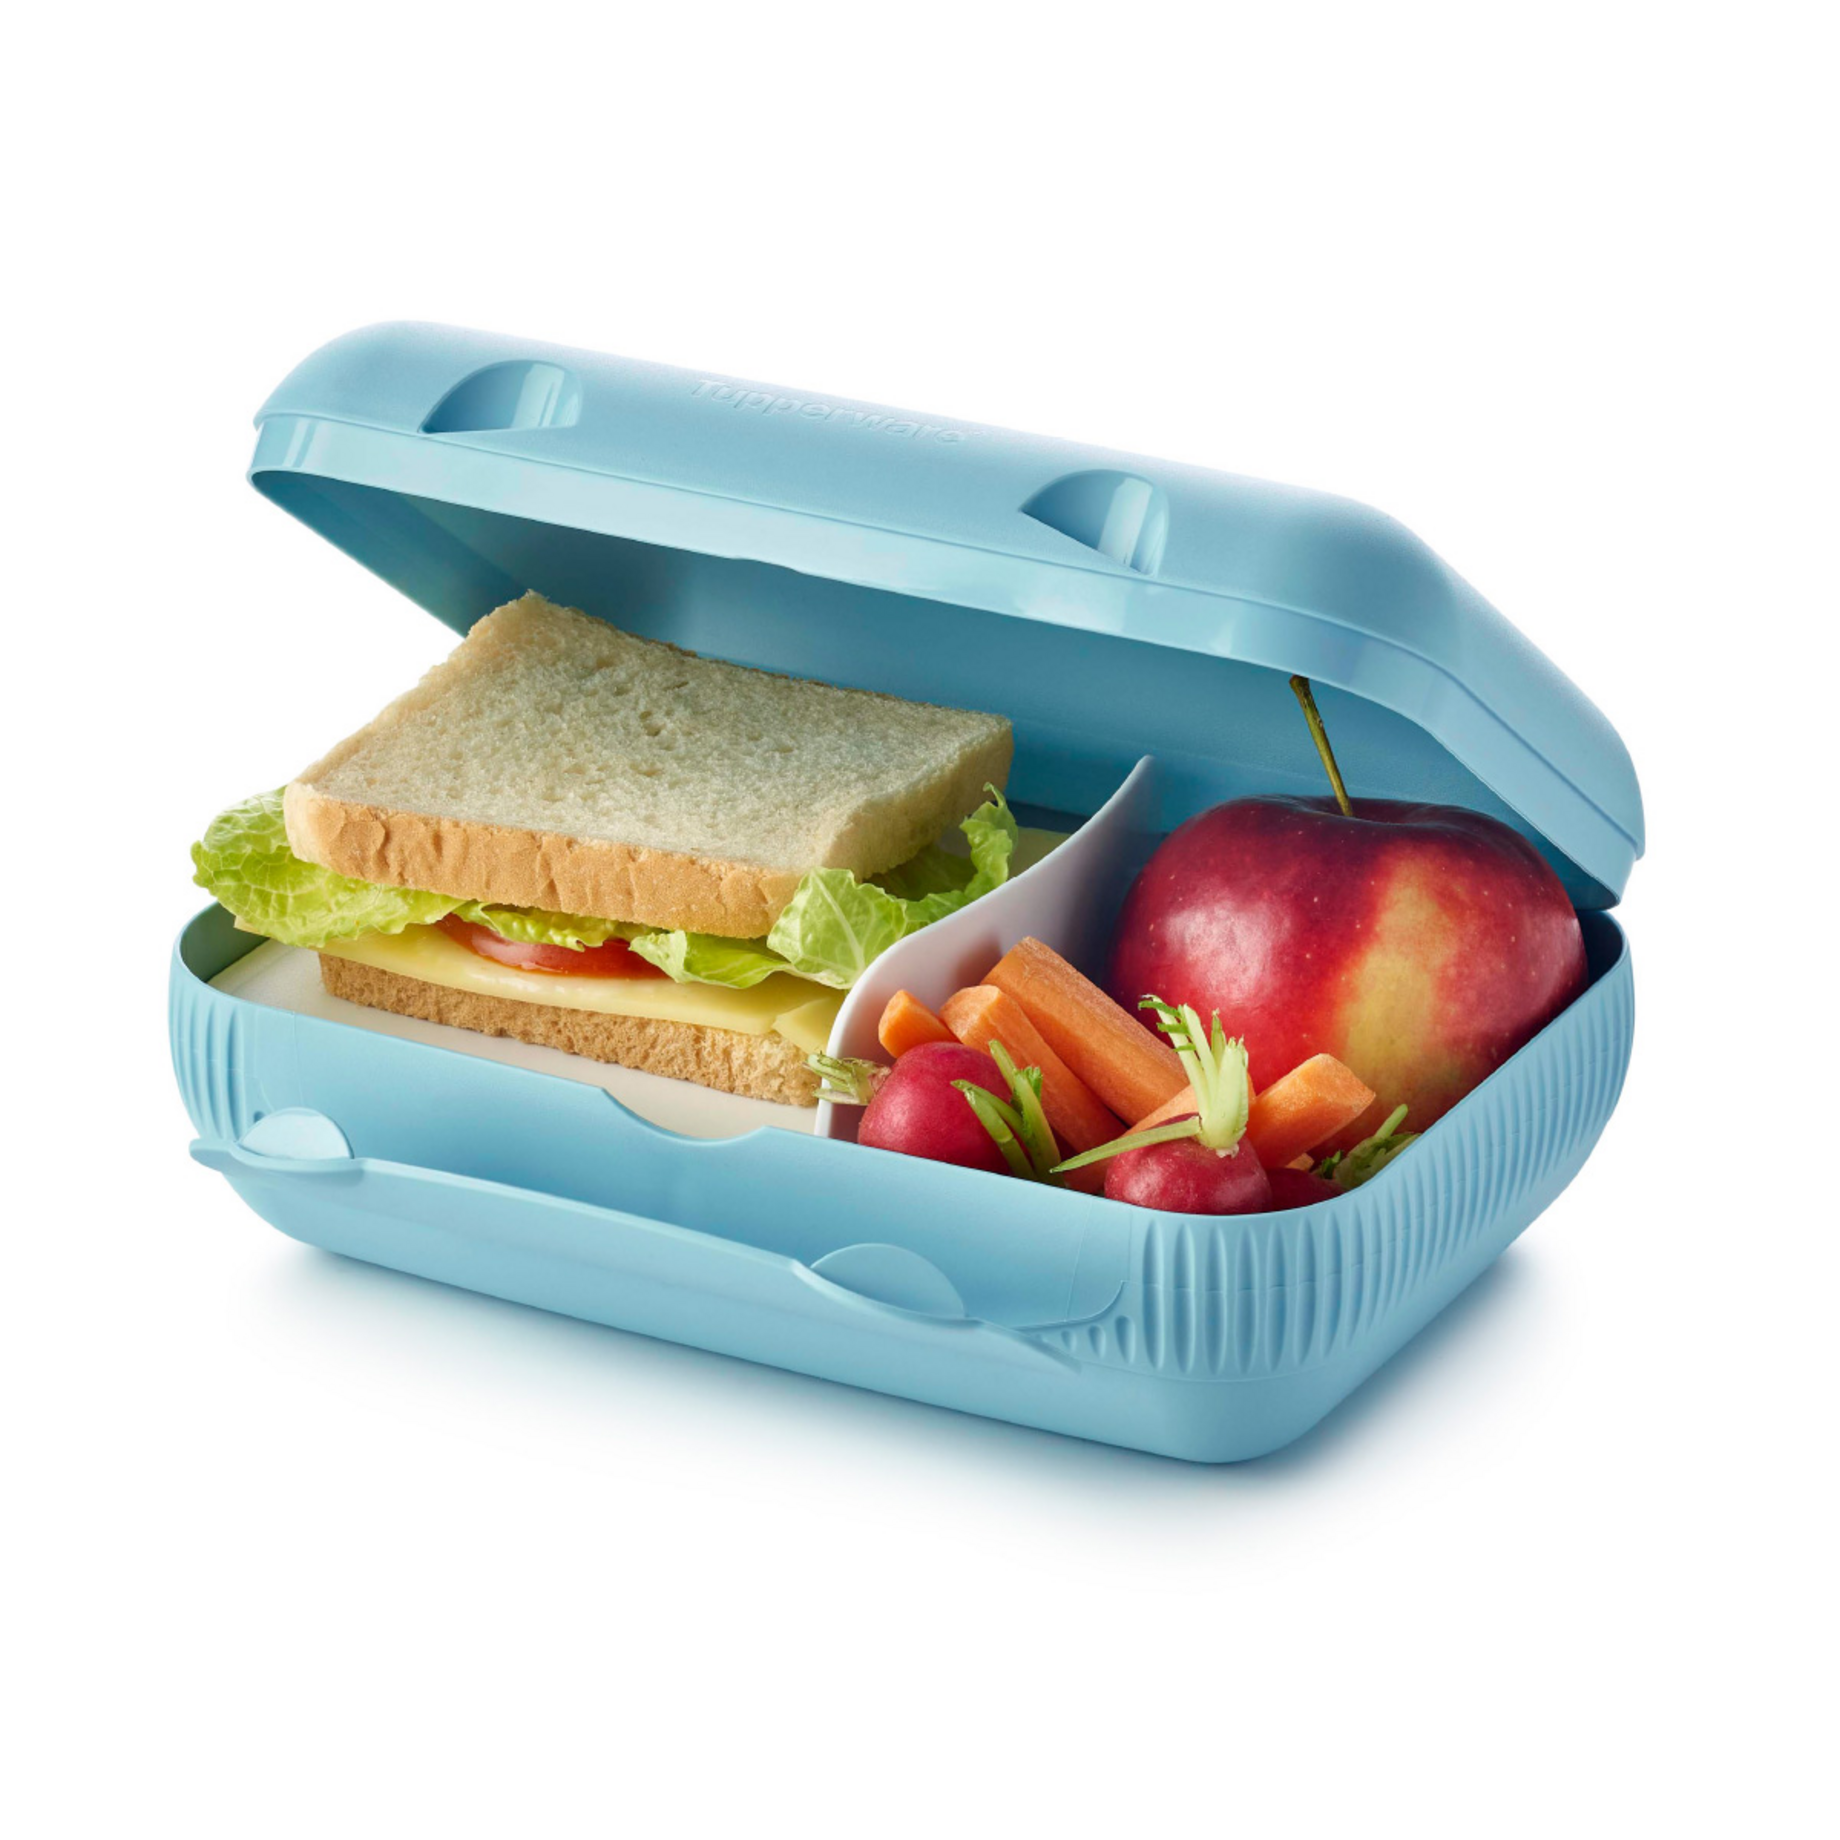 https://appng.tupperware.eu/service/appng/tupperware-products/rest/autoCrop/517905/1840/x